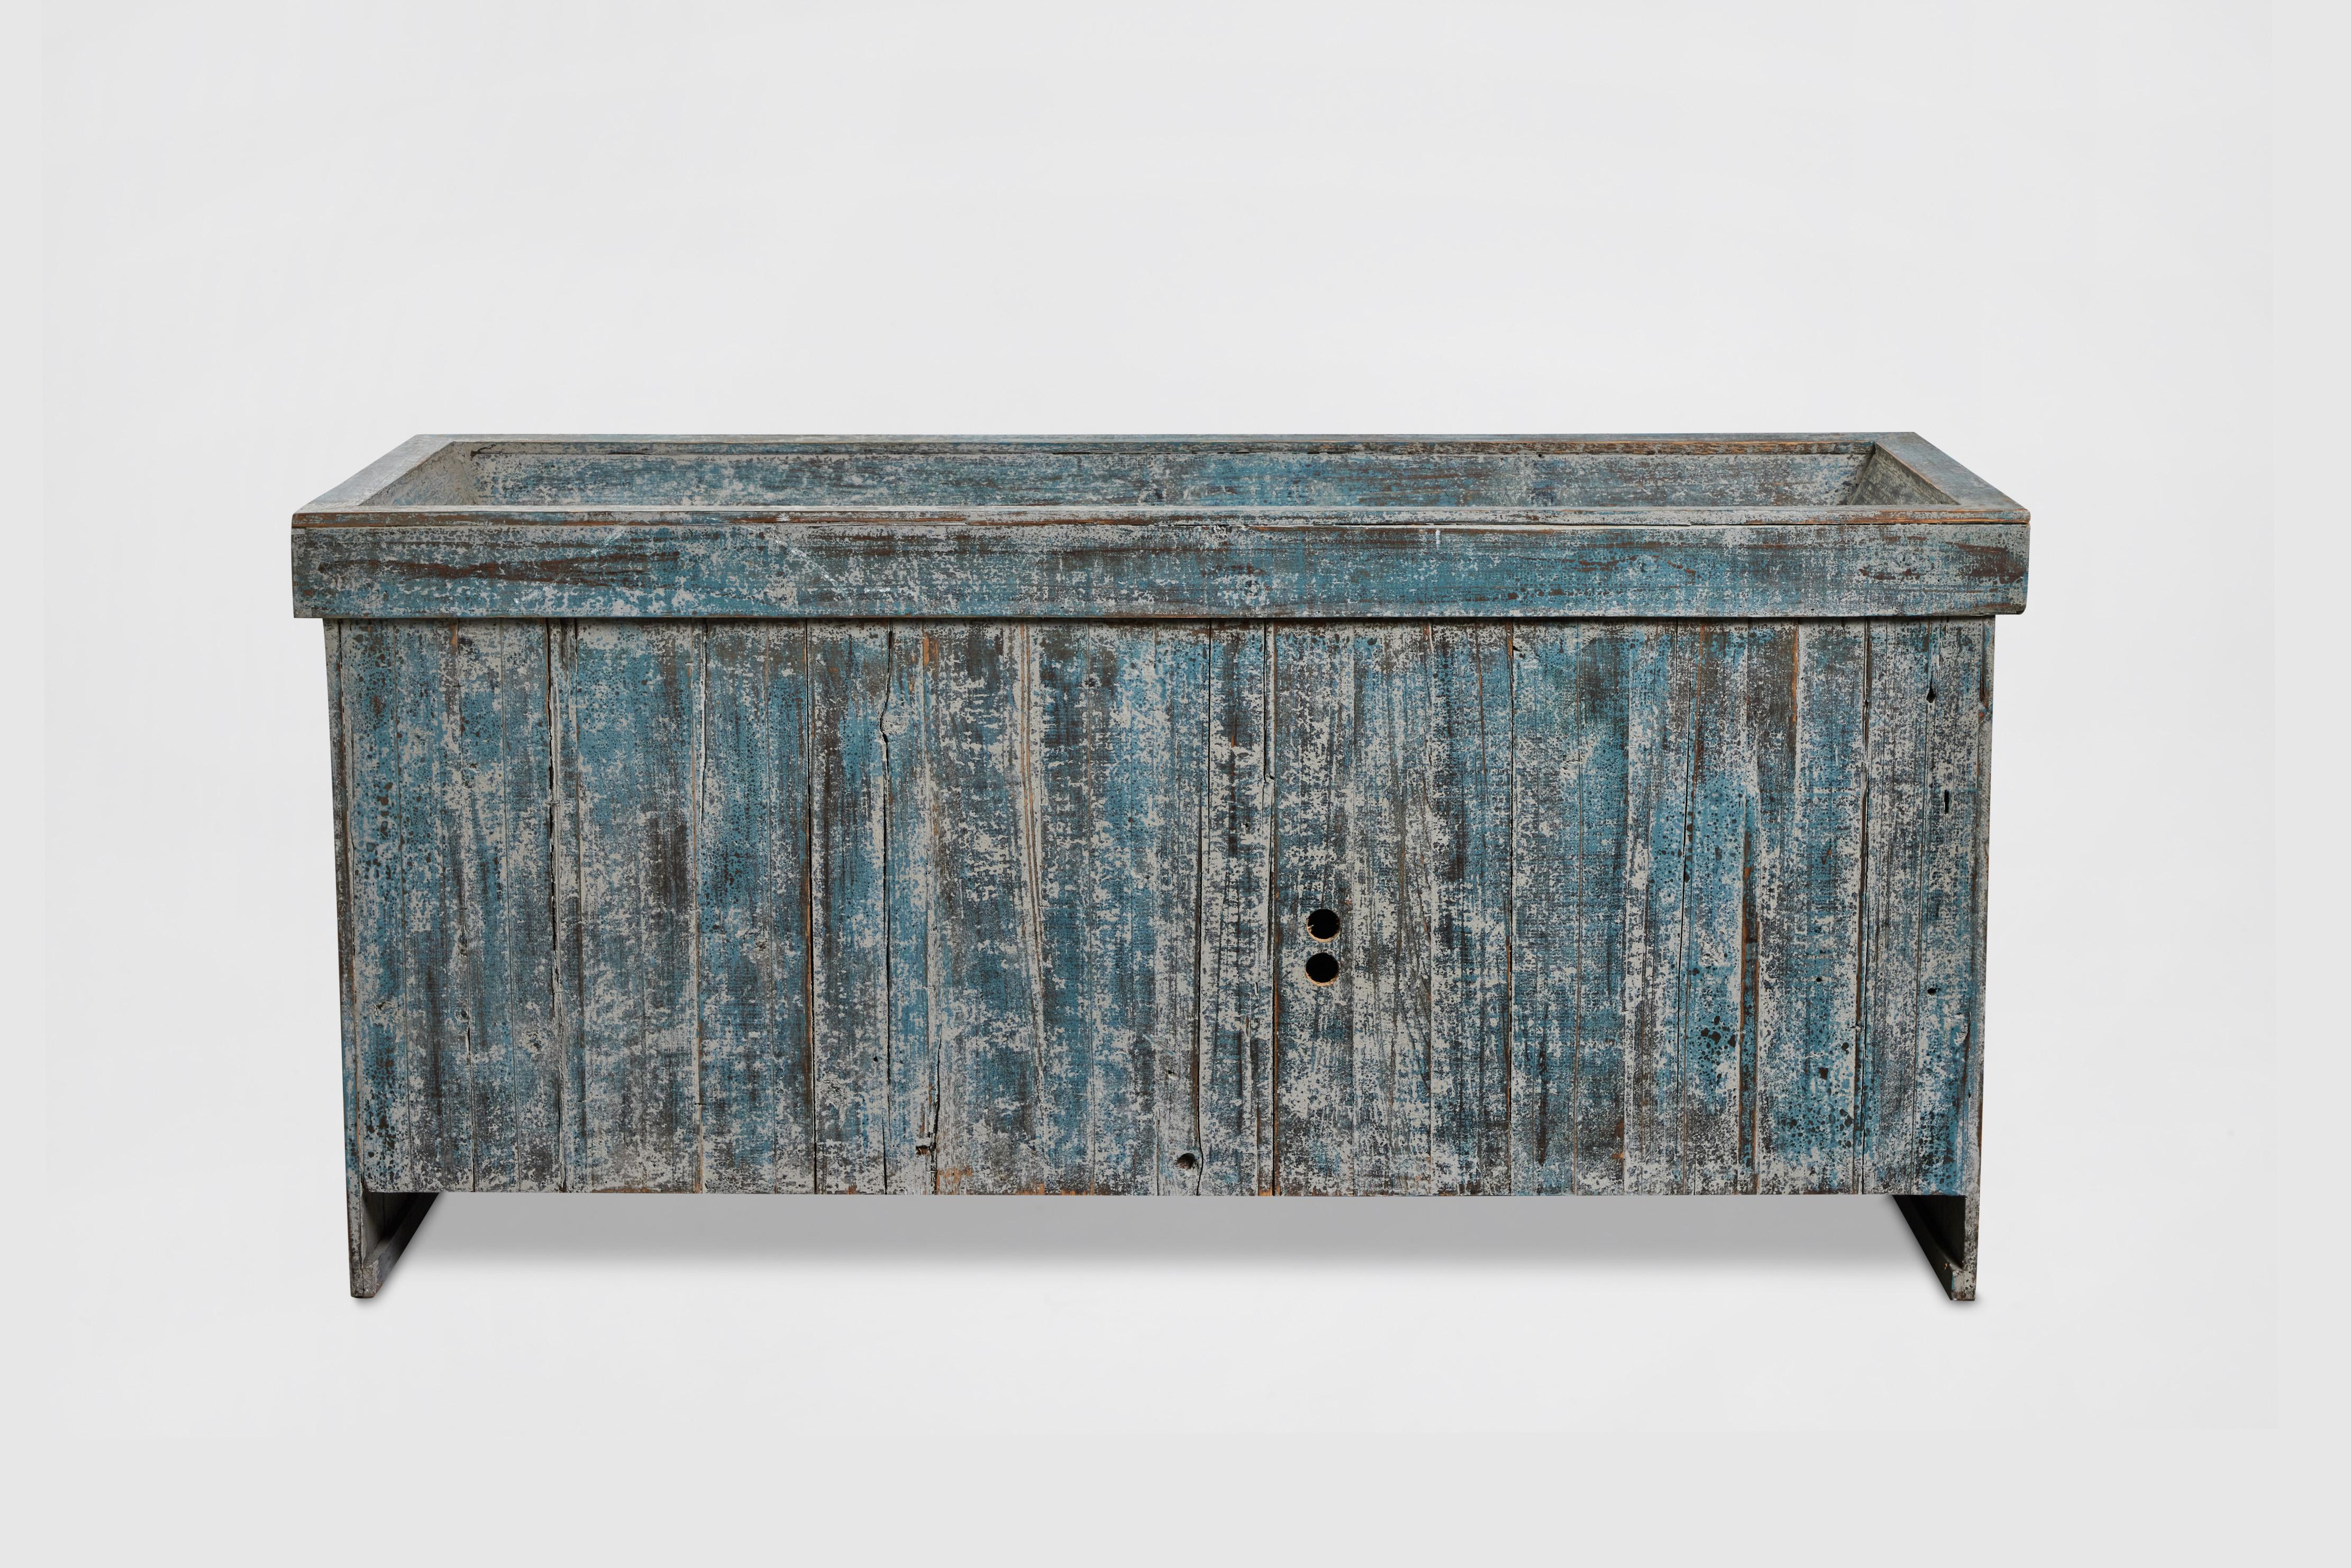 Late 20th Century white oak plank-front sideboard with distressed paint, blue-green and white. Two cabinet doors with tab latches, holes in back for cables. Would make a great media console as well. 

Made by John Hall Design, Los Angeles, 1995. 